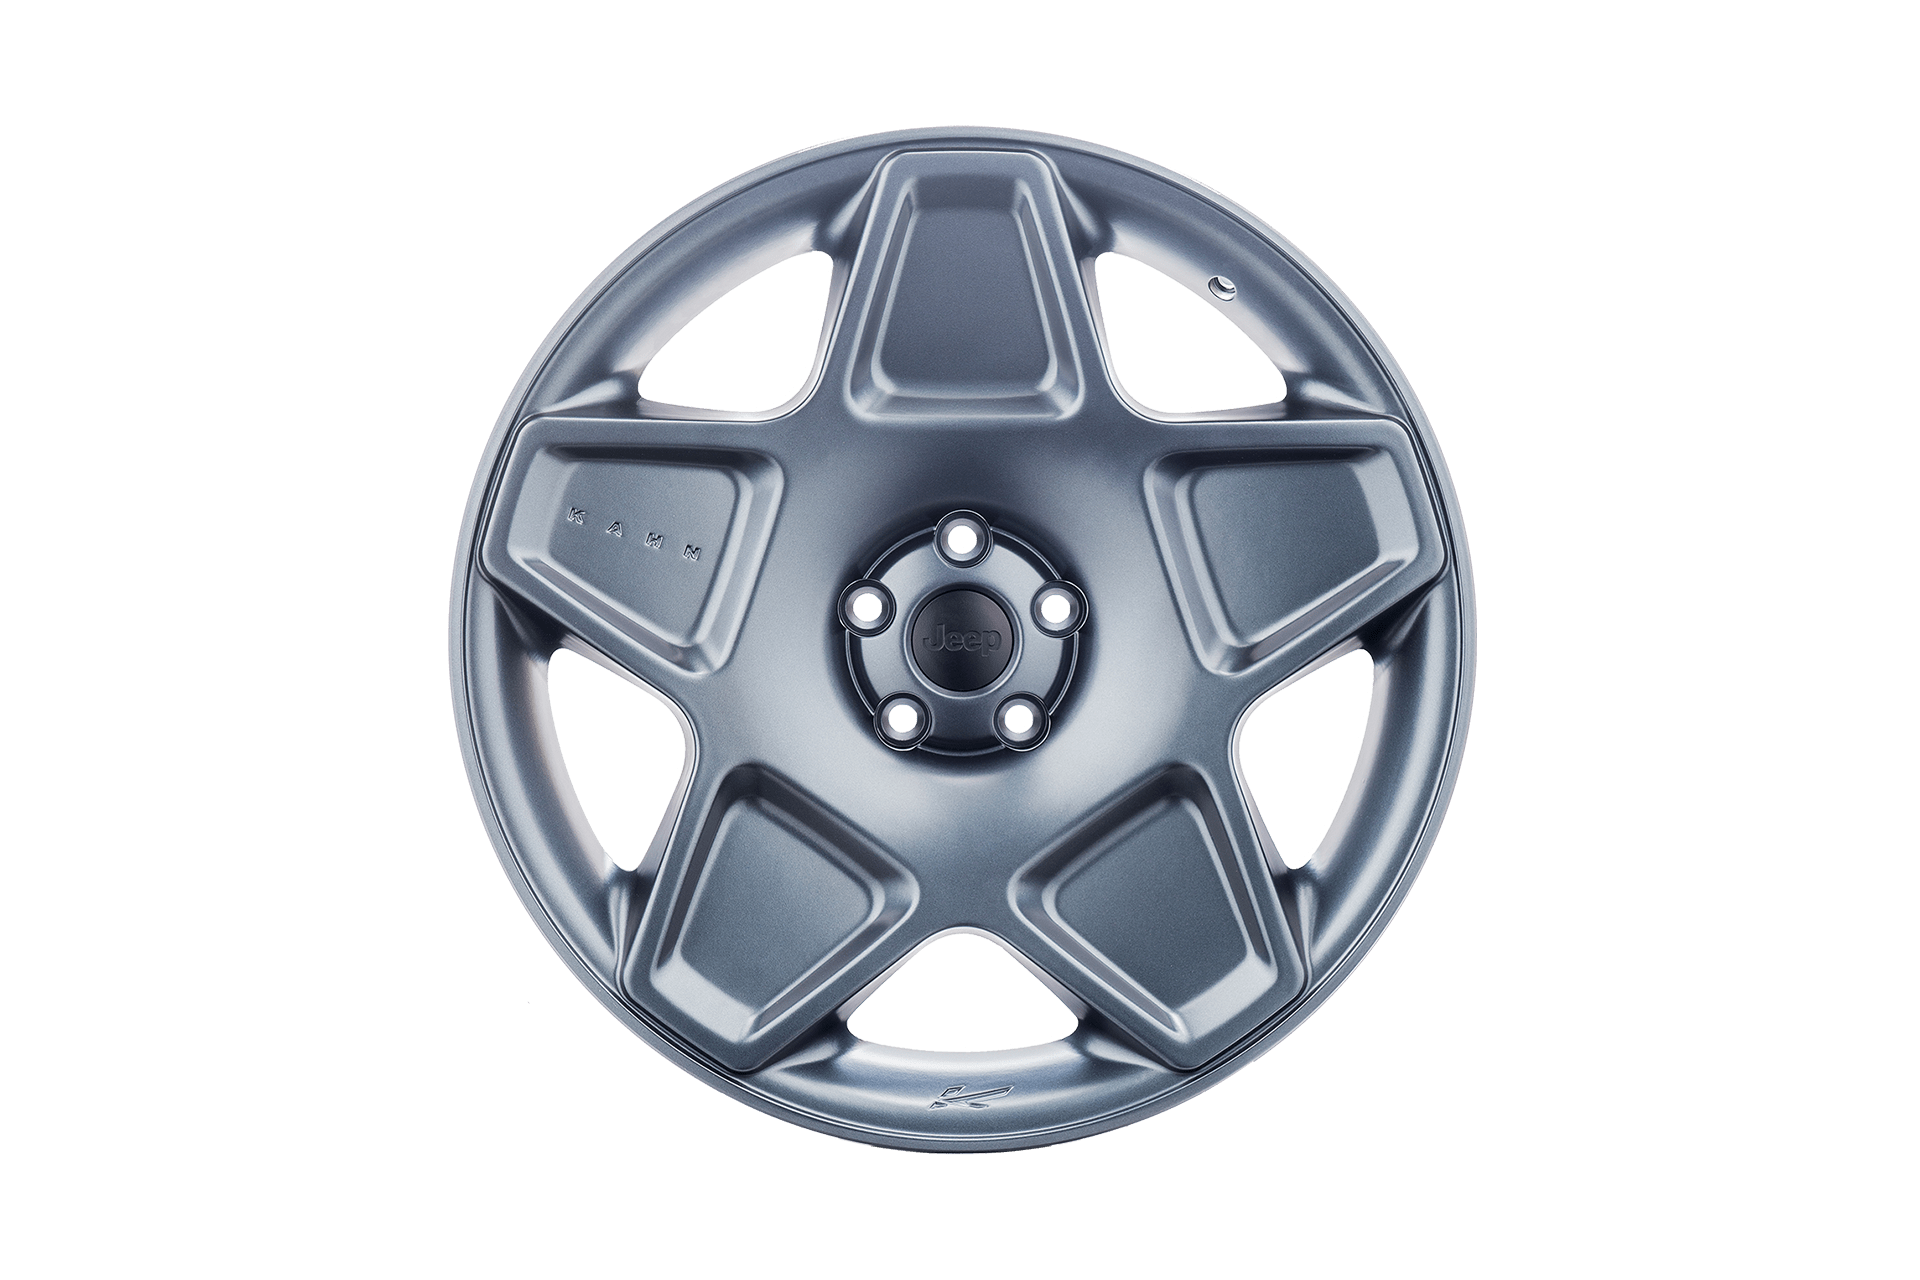 Jeep Renegade Mondial Retro Light Alloy Wheels by Chelsea Truck Company - Image 2997